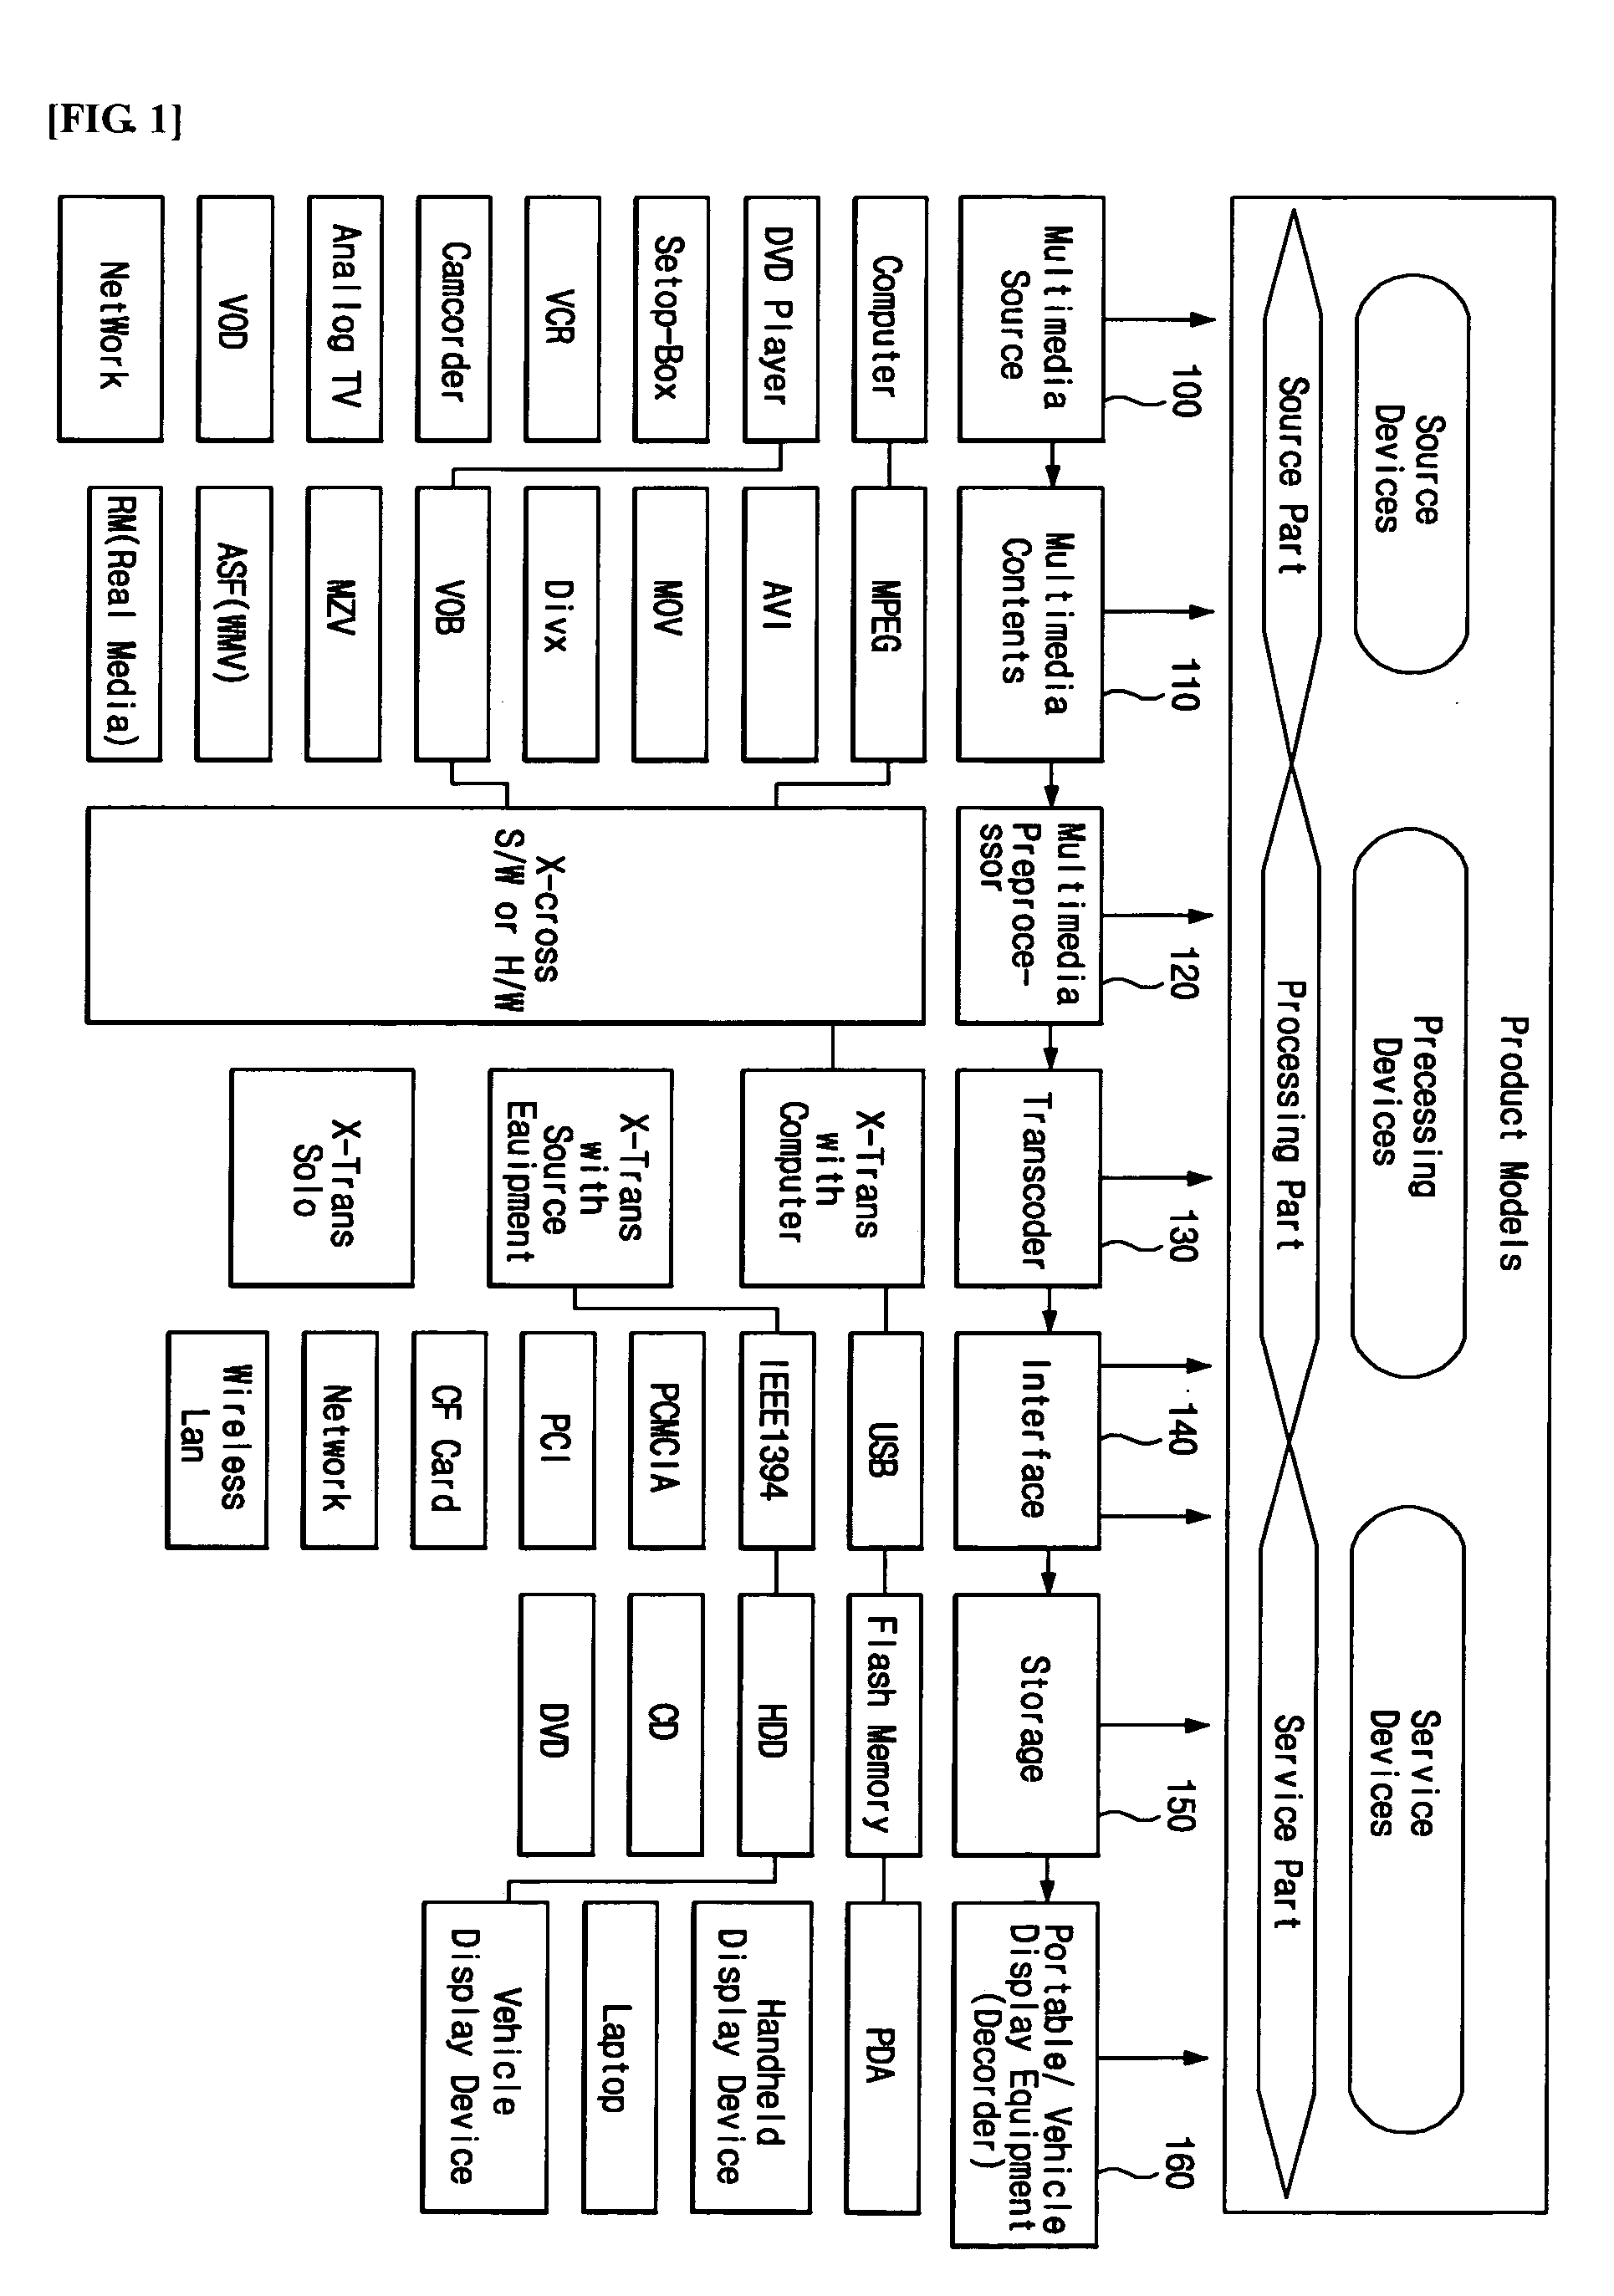 Multimedia service system for portable devices using hardware transcoder